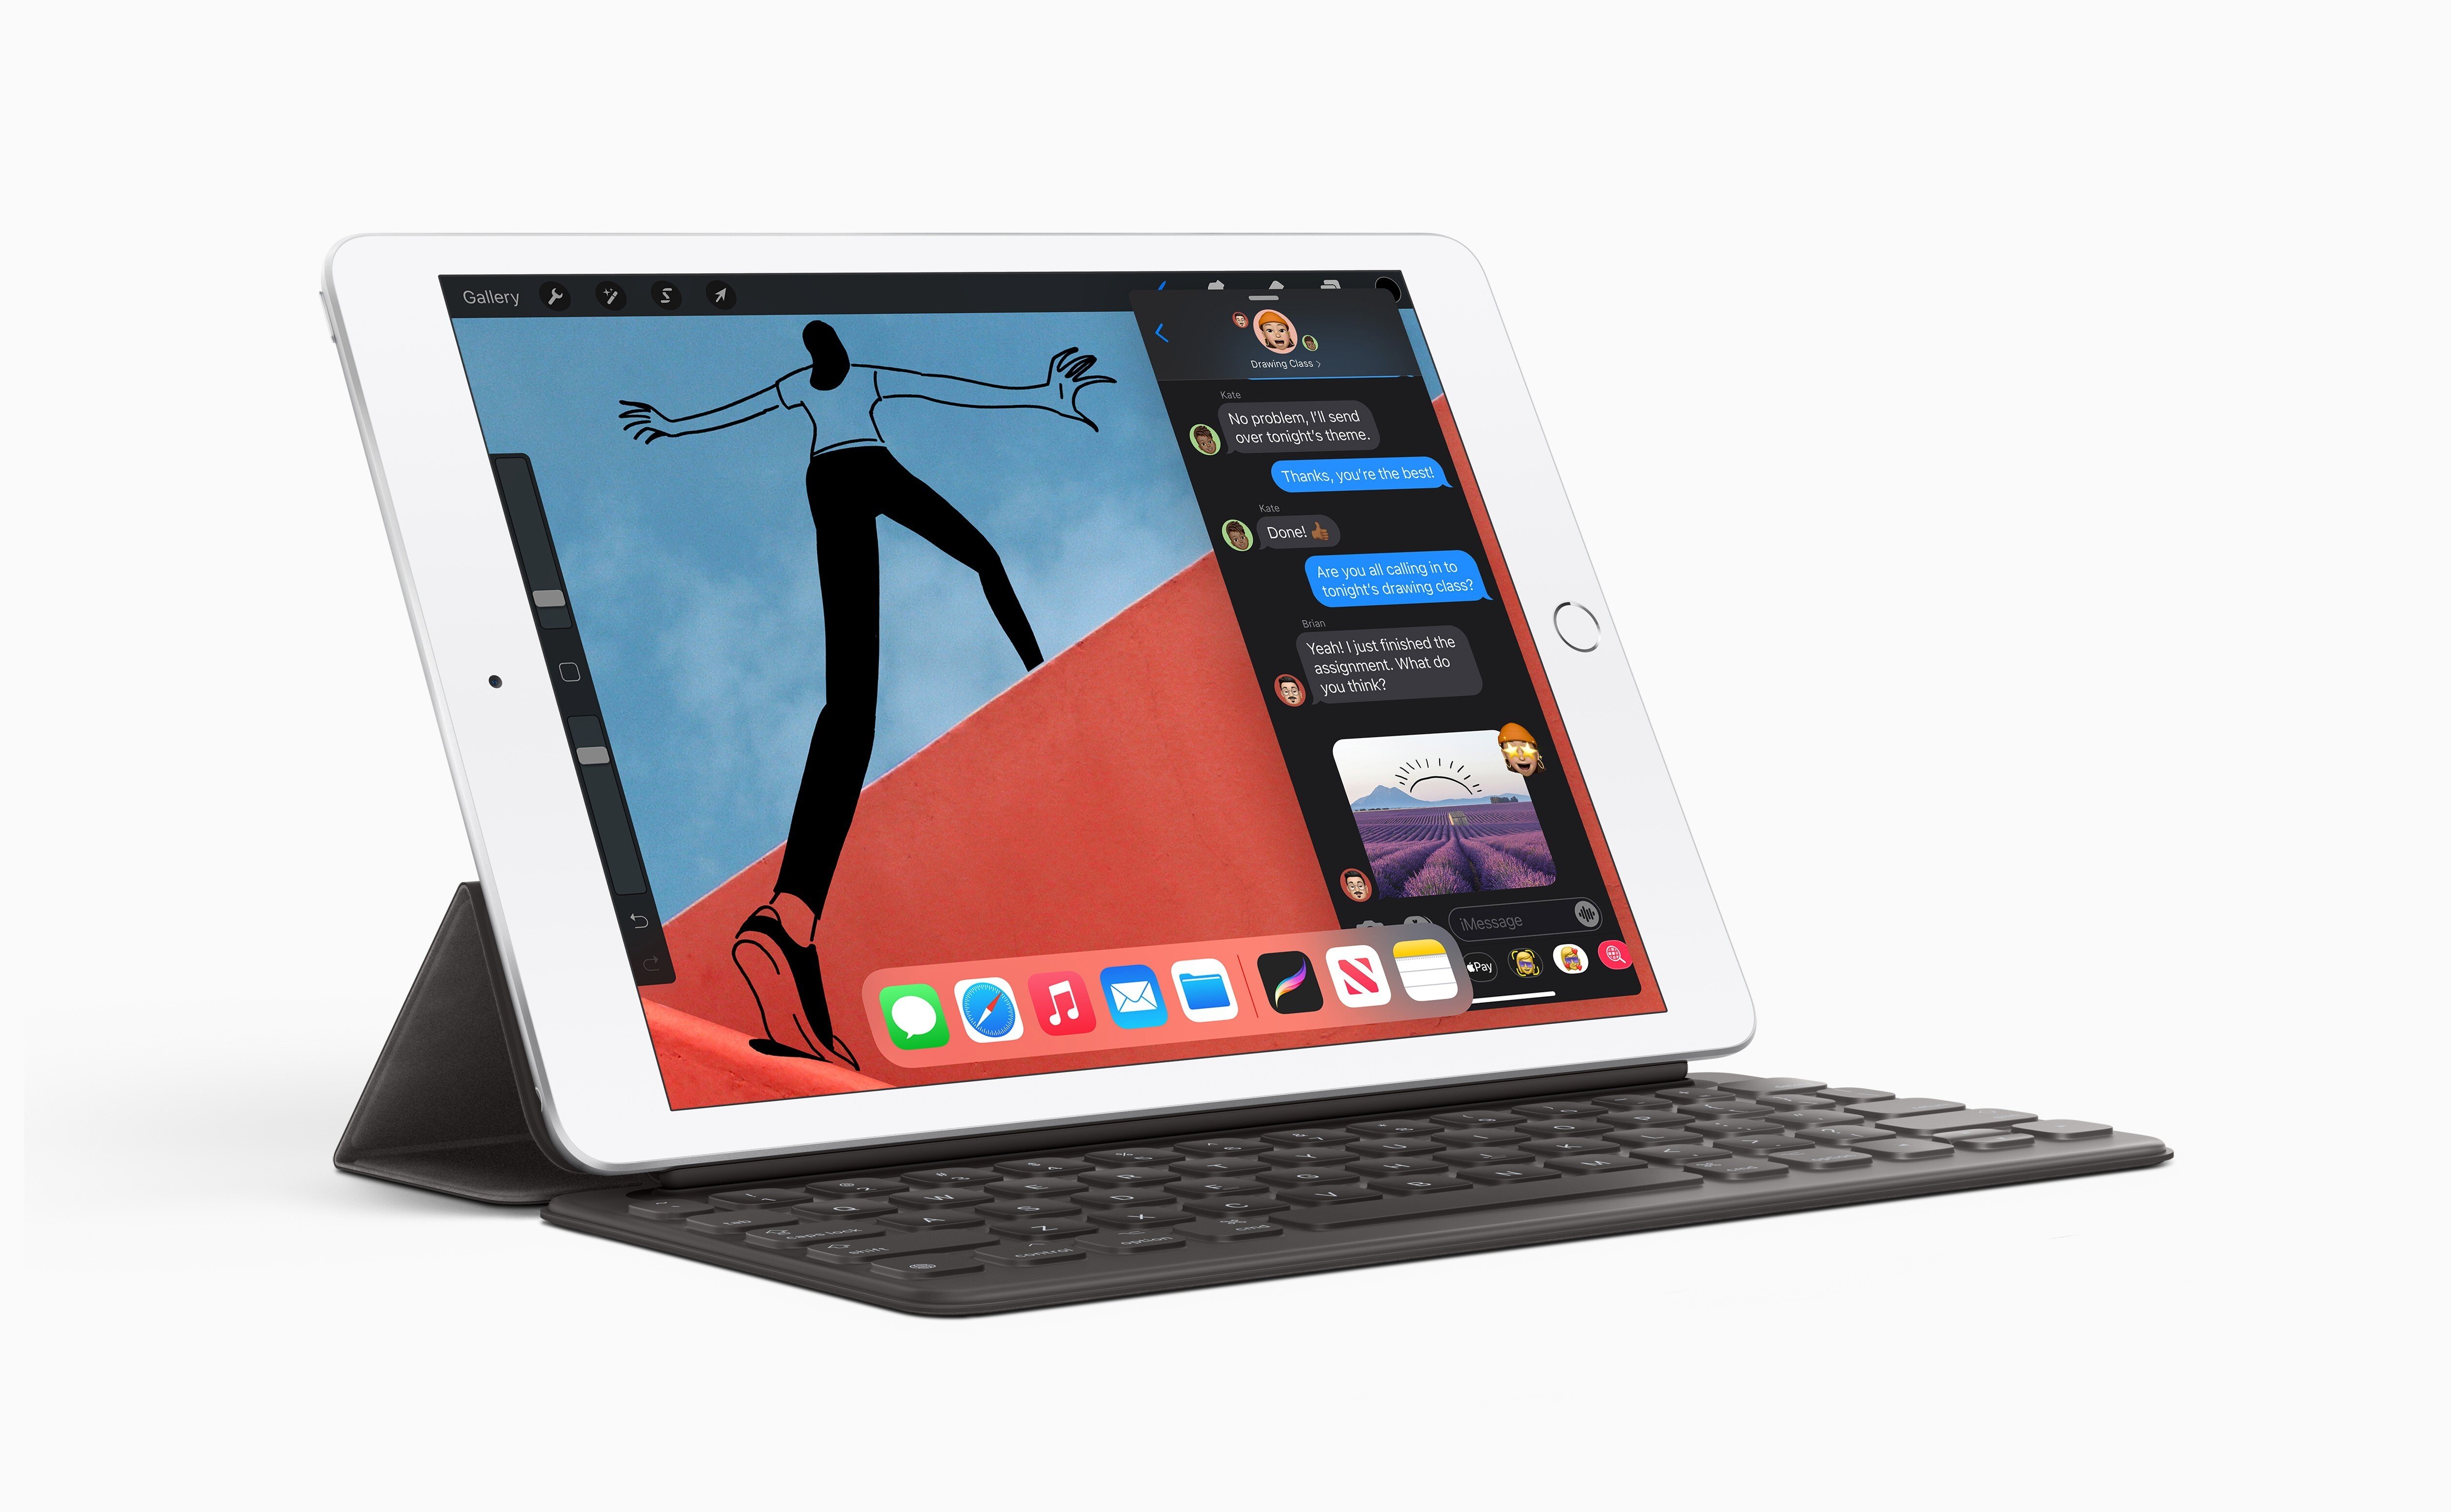 Apple unveiled an upgraded entry-level iPad on Tuesday, but netizens aren’t impressed in China, where Huawei recently became the largest tablet brand by shipments. Photo: Apple